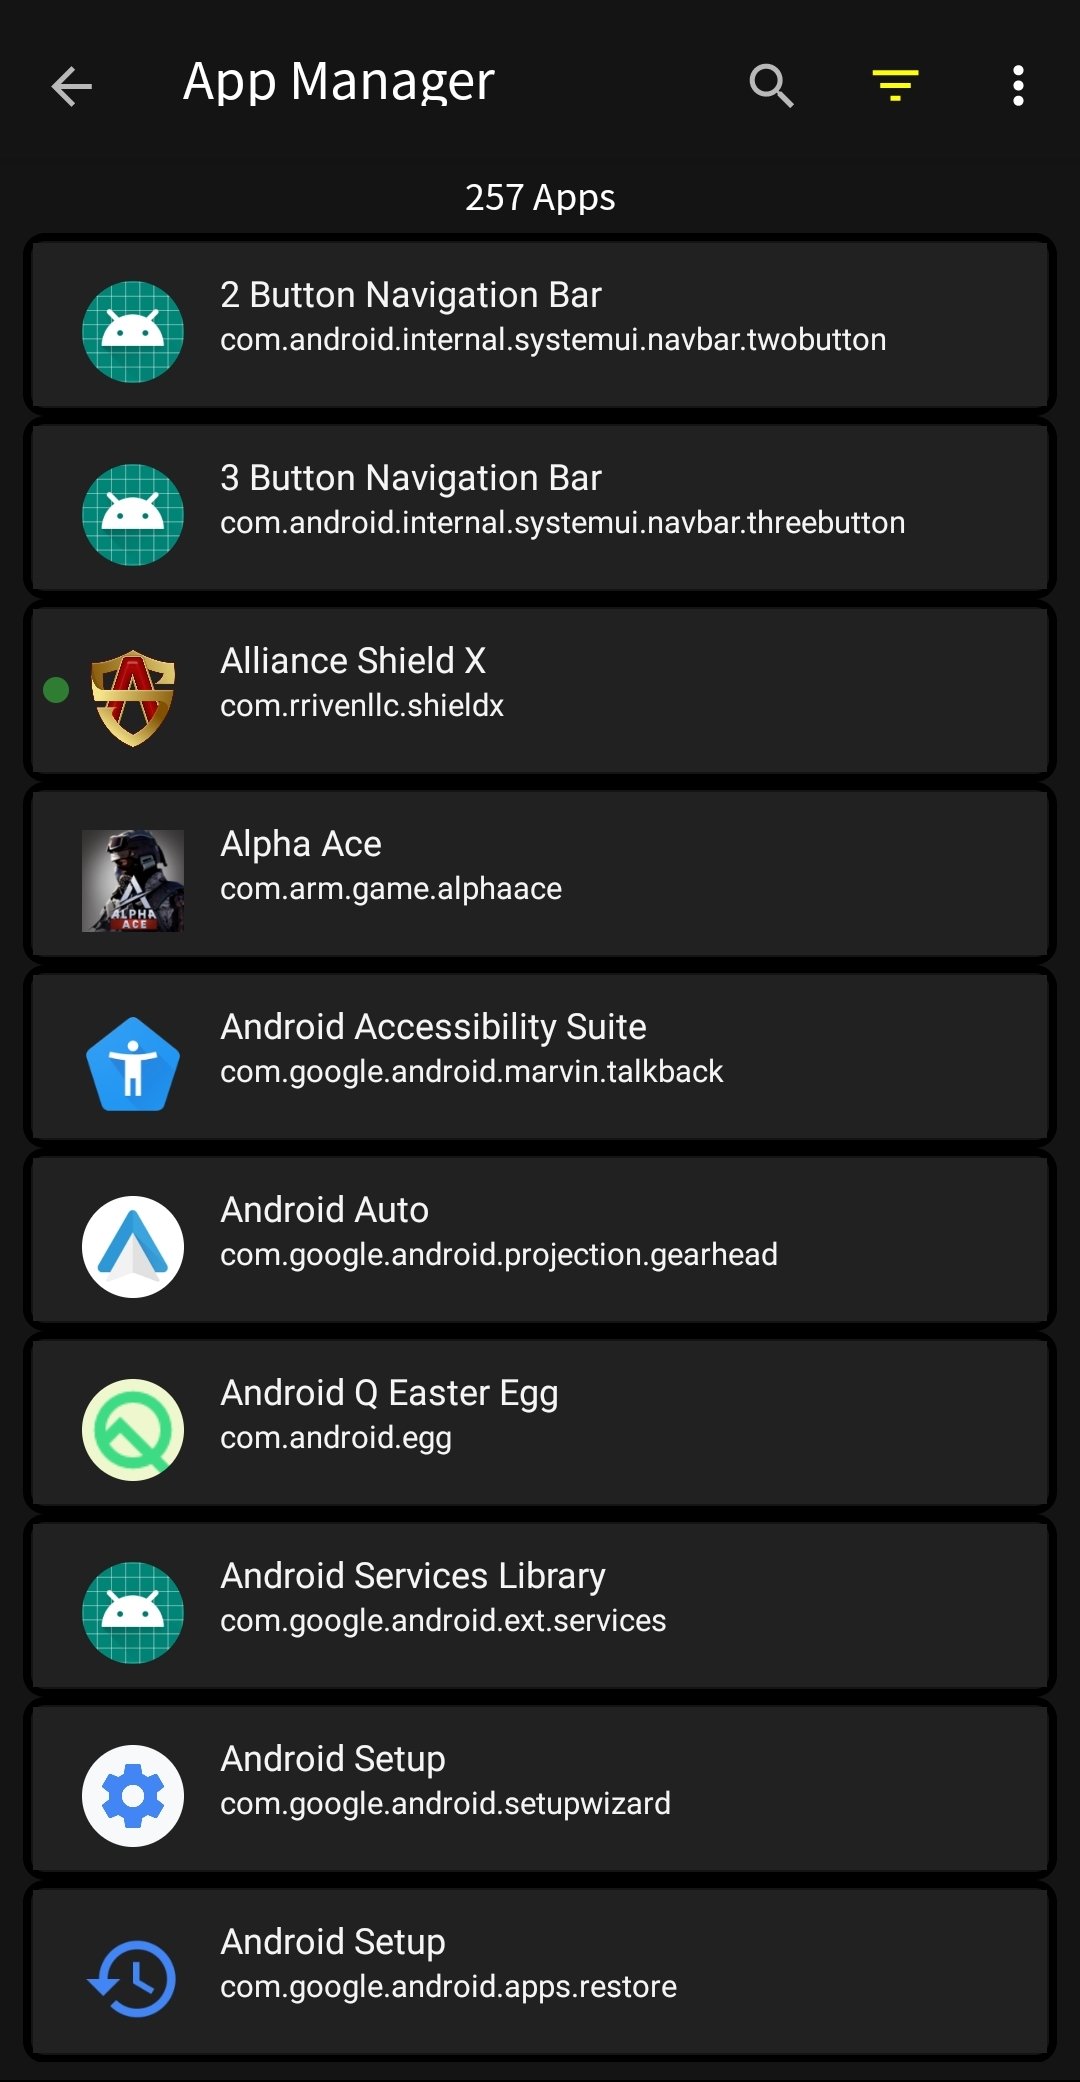 Alliance Shield X Knox licensed disabled by Samsung, no more app